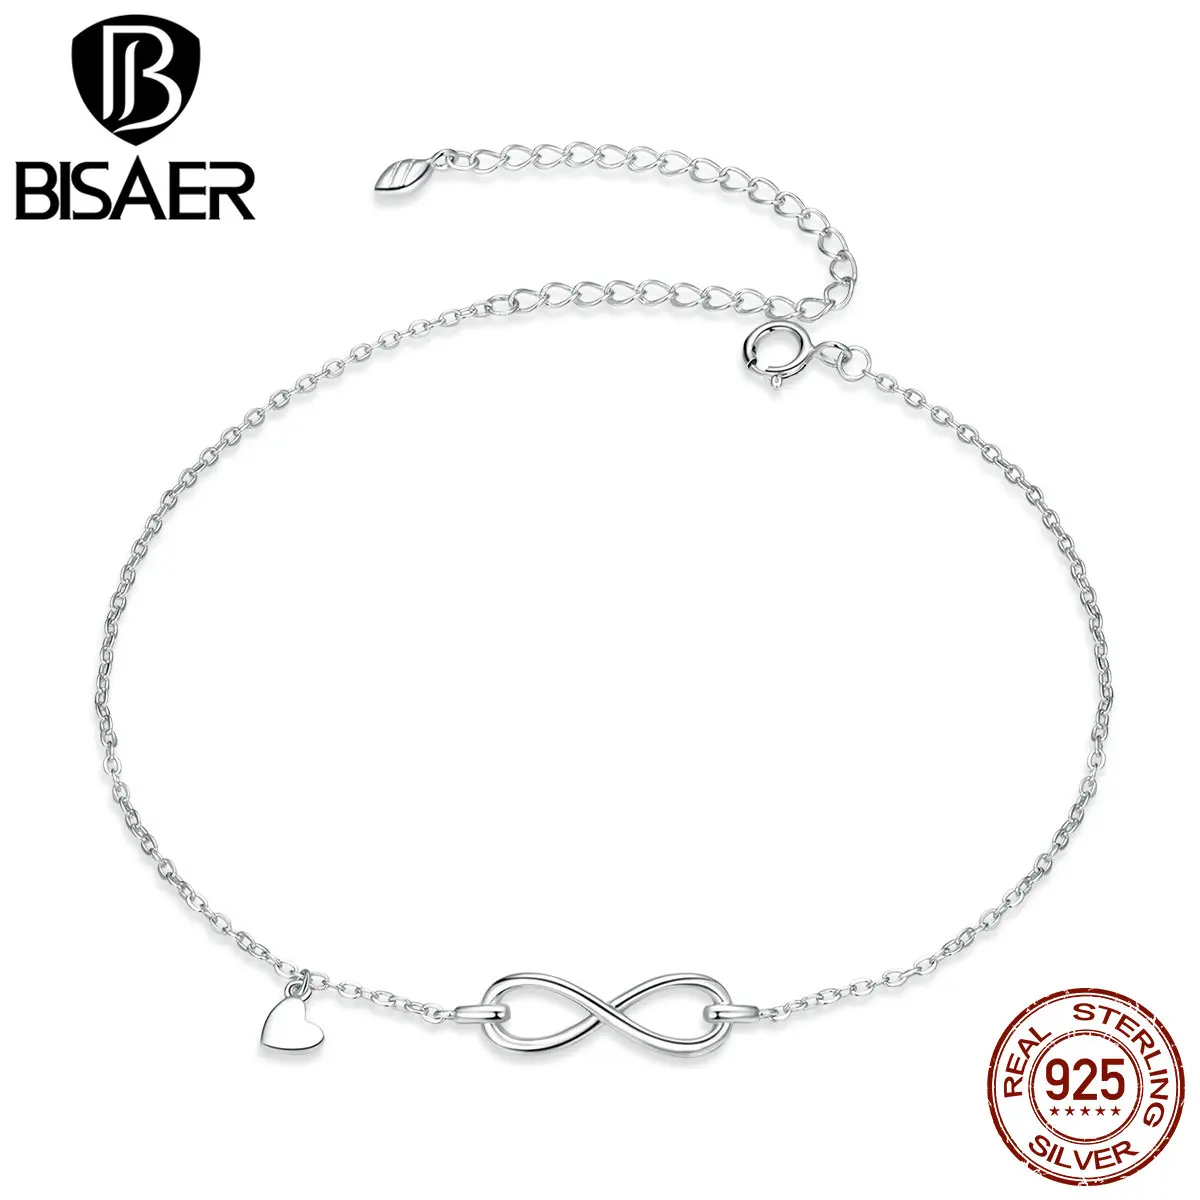 BISAER Infinity Love Anklets 925 Sterling Silver Geometric Heart Chain Anklets For Women Feet Leg Chain Link Jewelry ECT019